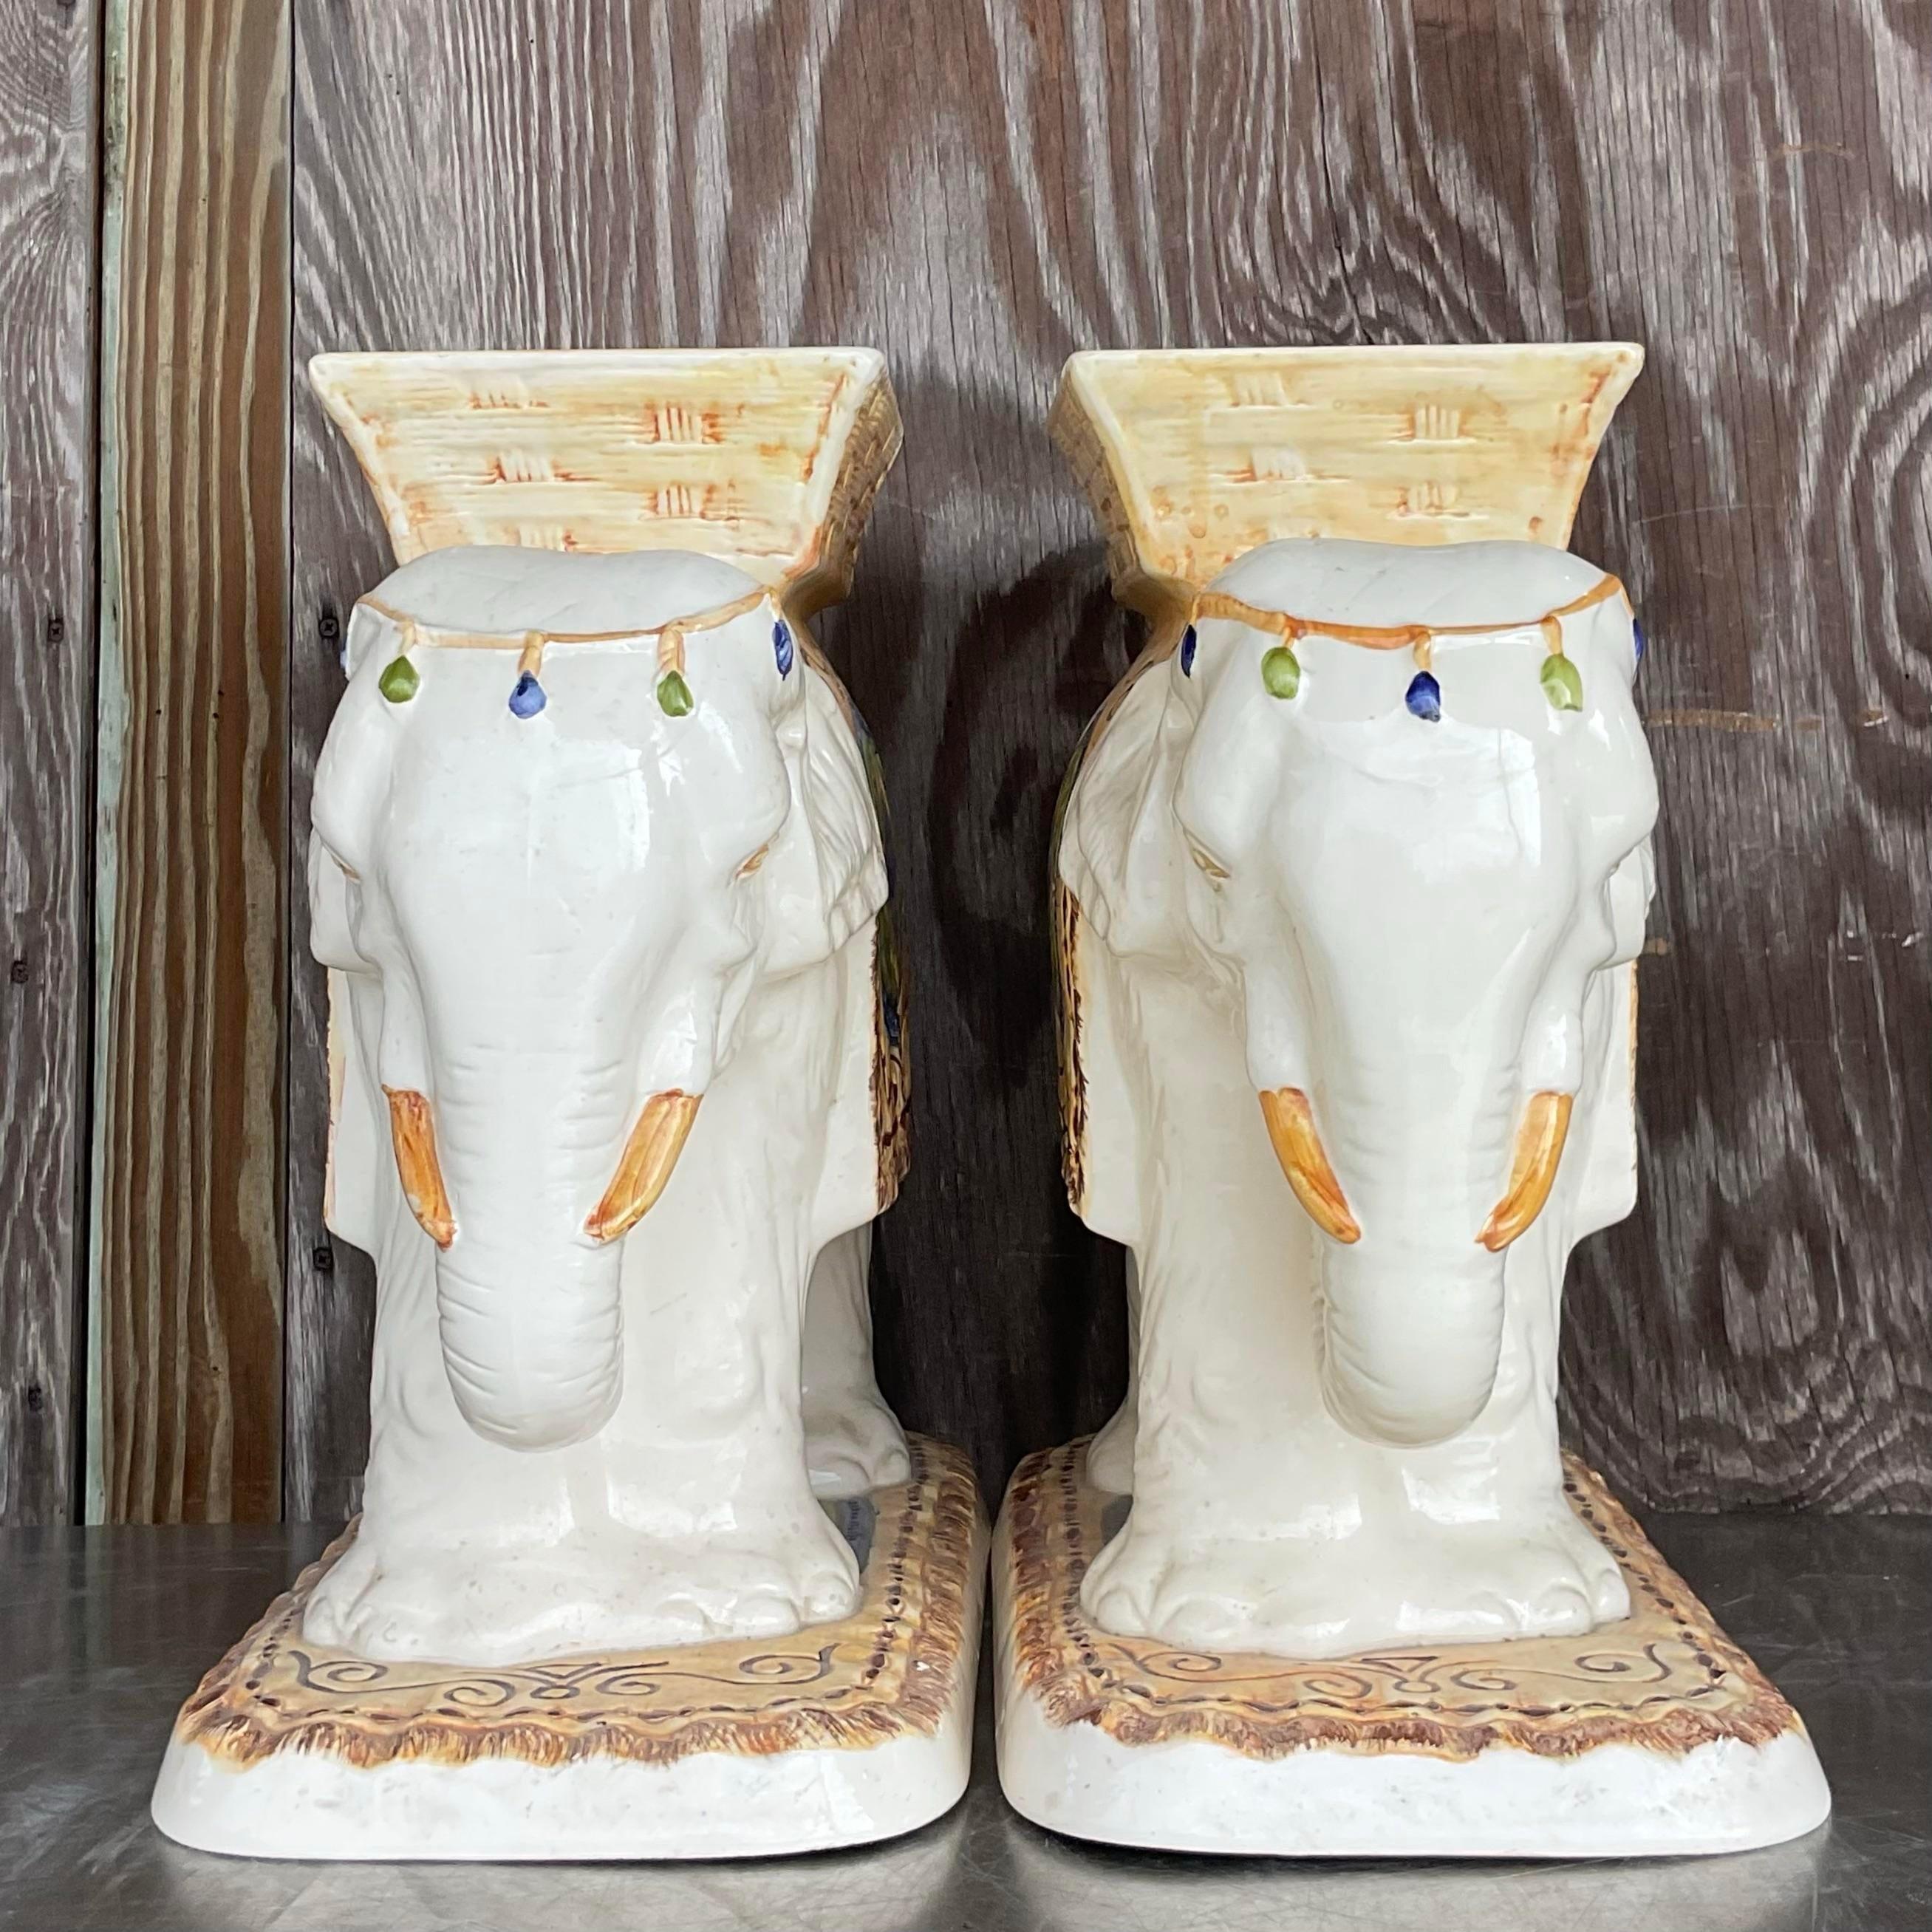 Vintage Boho Glazed Ceramic Elephant Stools - a Pair In Good Condition For Sale In west palm beach, FL